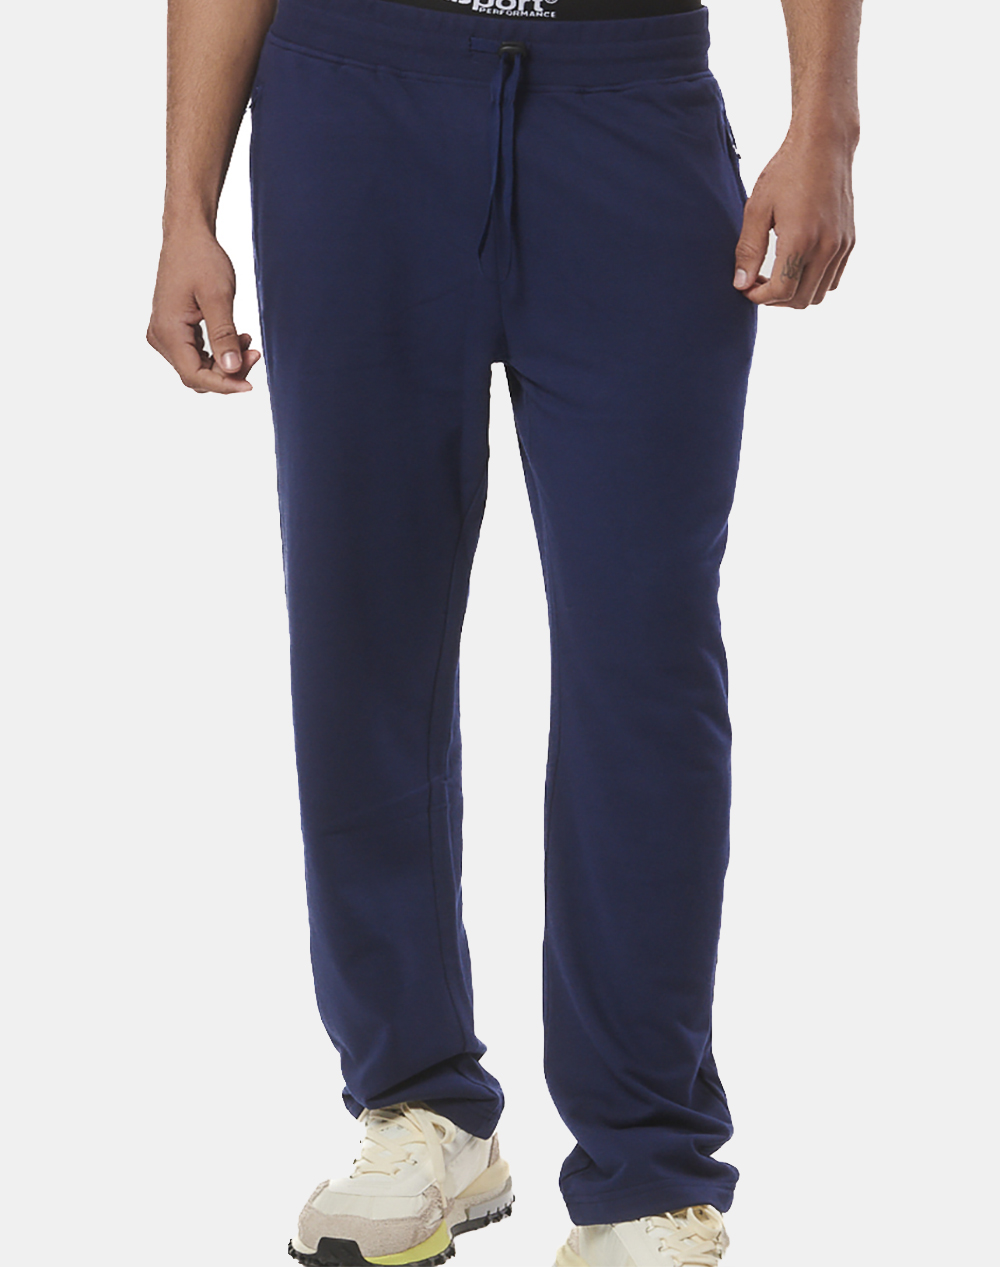 BODY ACTION MEN”S ESSENTIAL STRAIGHT SWEATPANTS W/ZIPPERS 023430-01-PEACOAT BLUE NavyBlue 3820PBODY2040076_6635